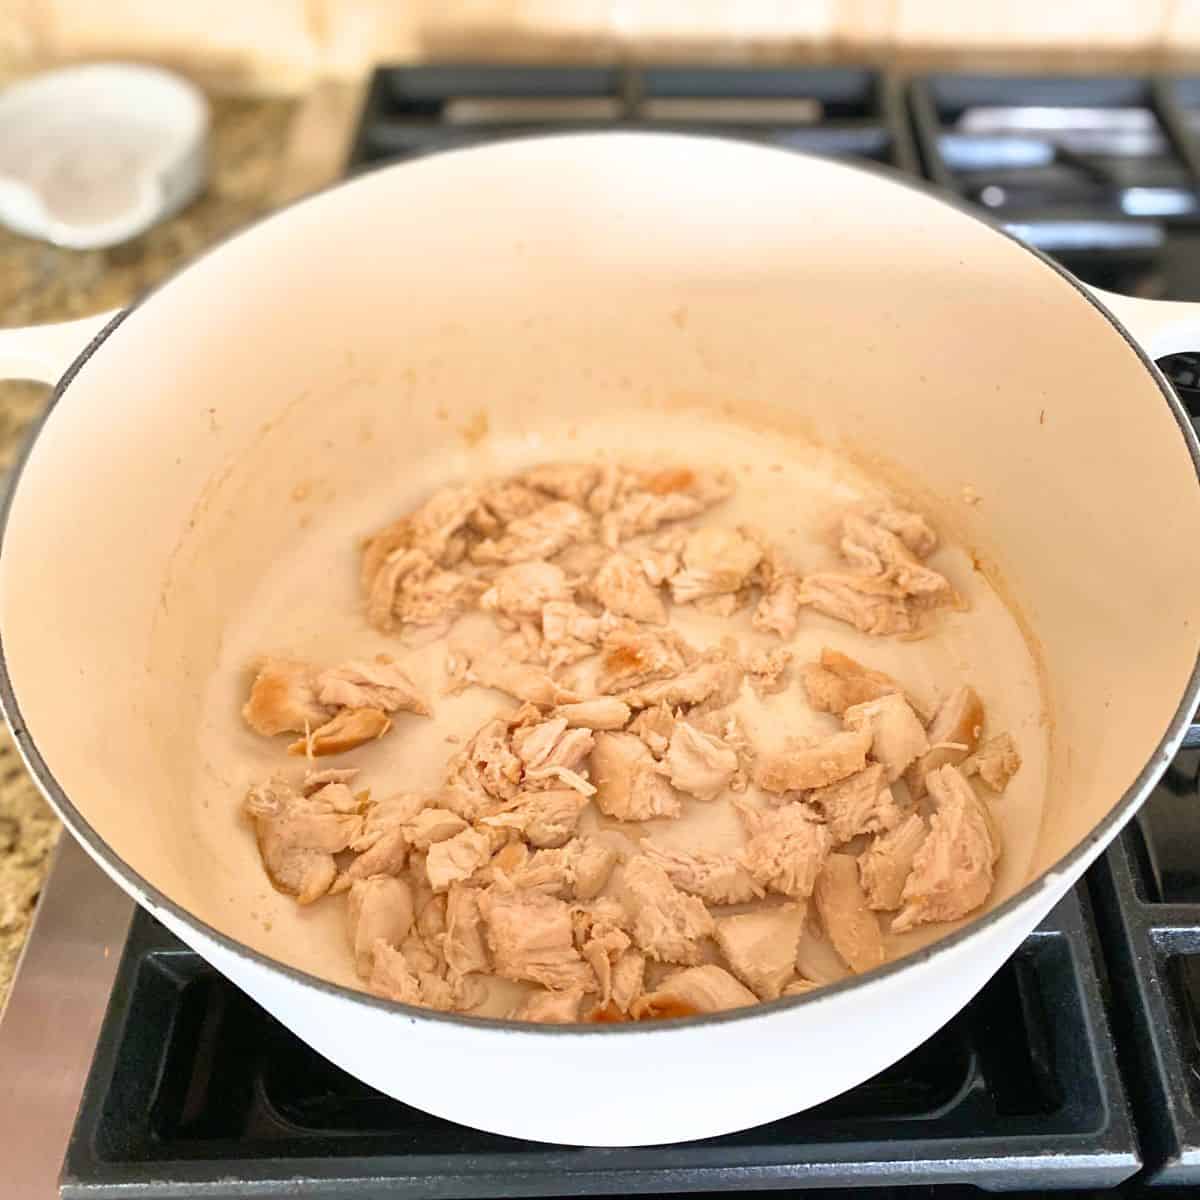 cut up cooked chicken in white cast iron pot